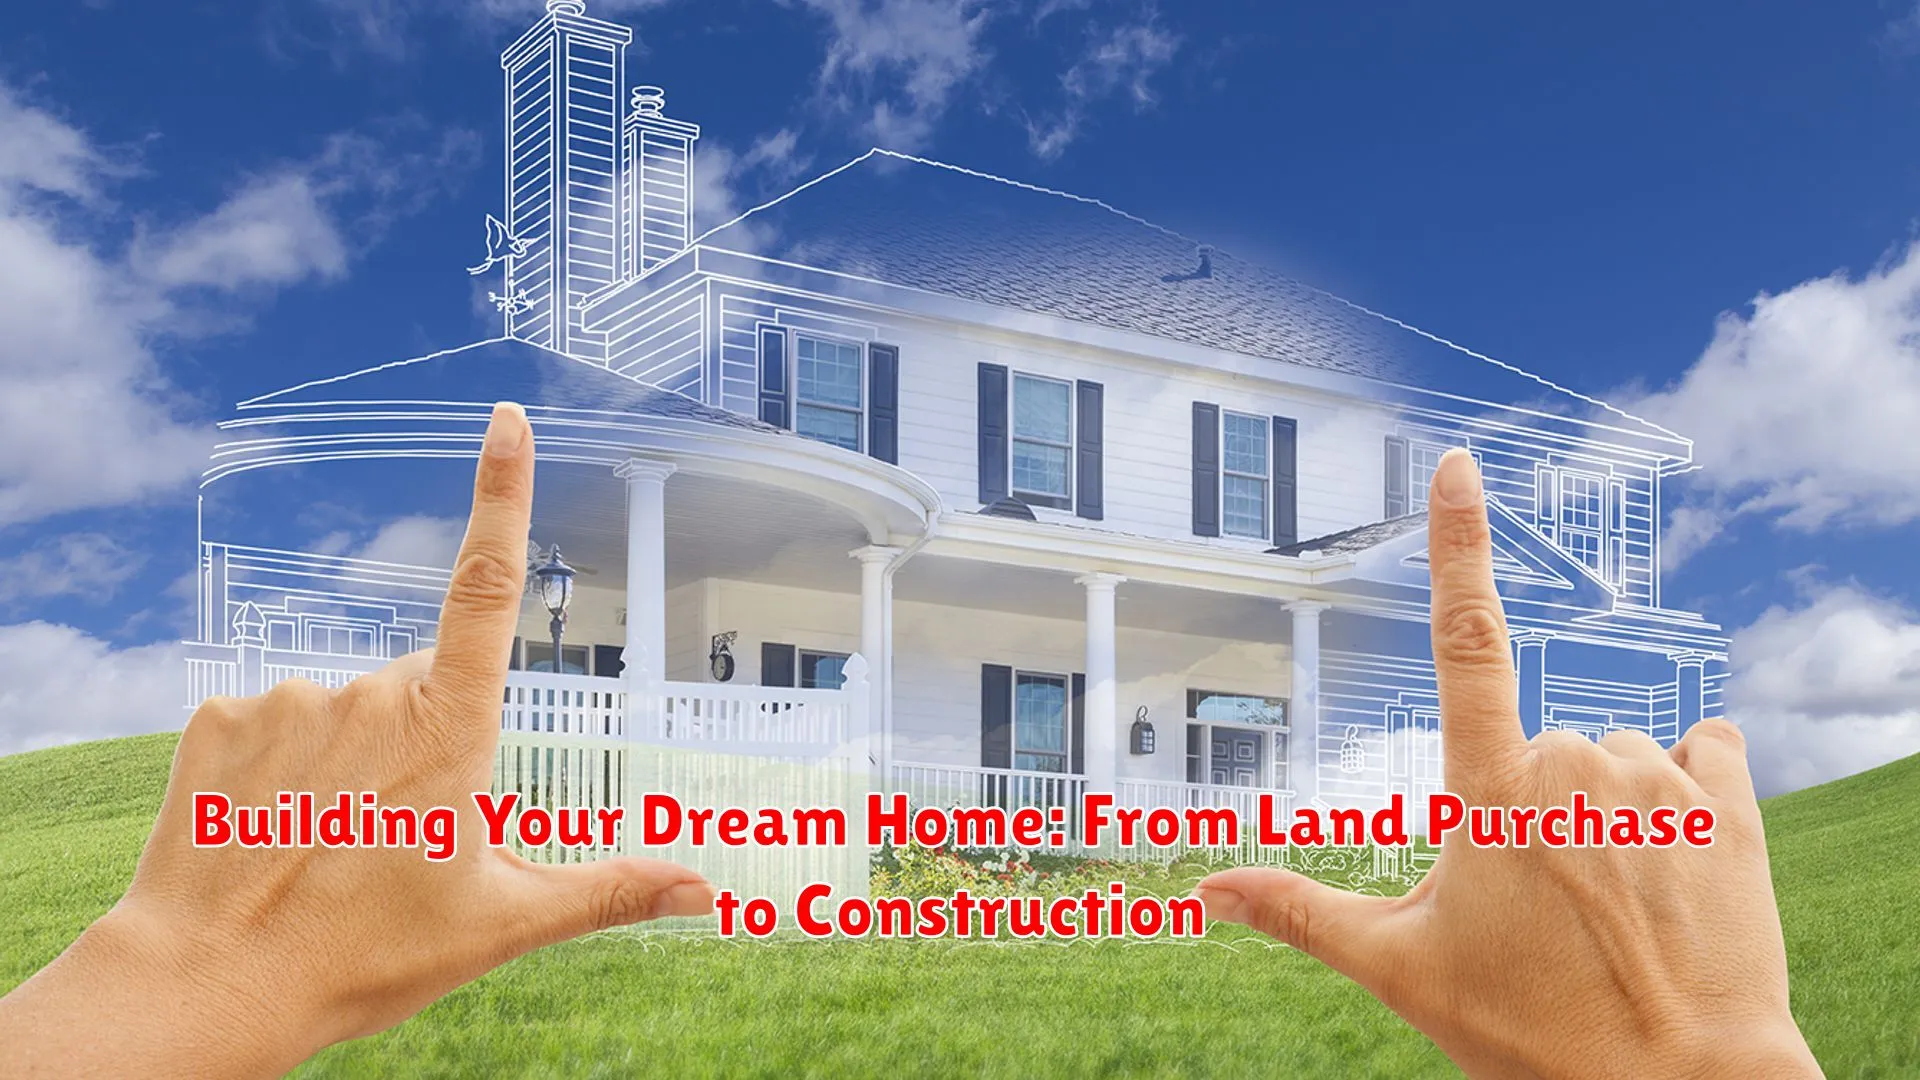 Building Your Dream Home: From Land Purchase to Construction